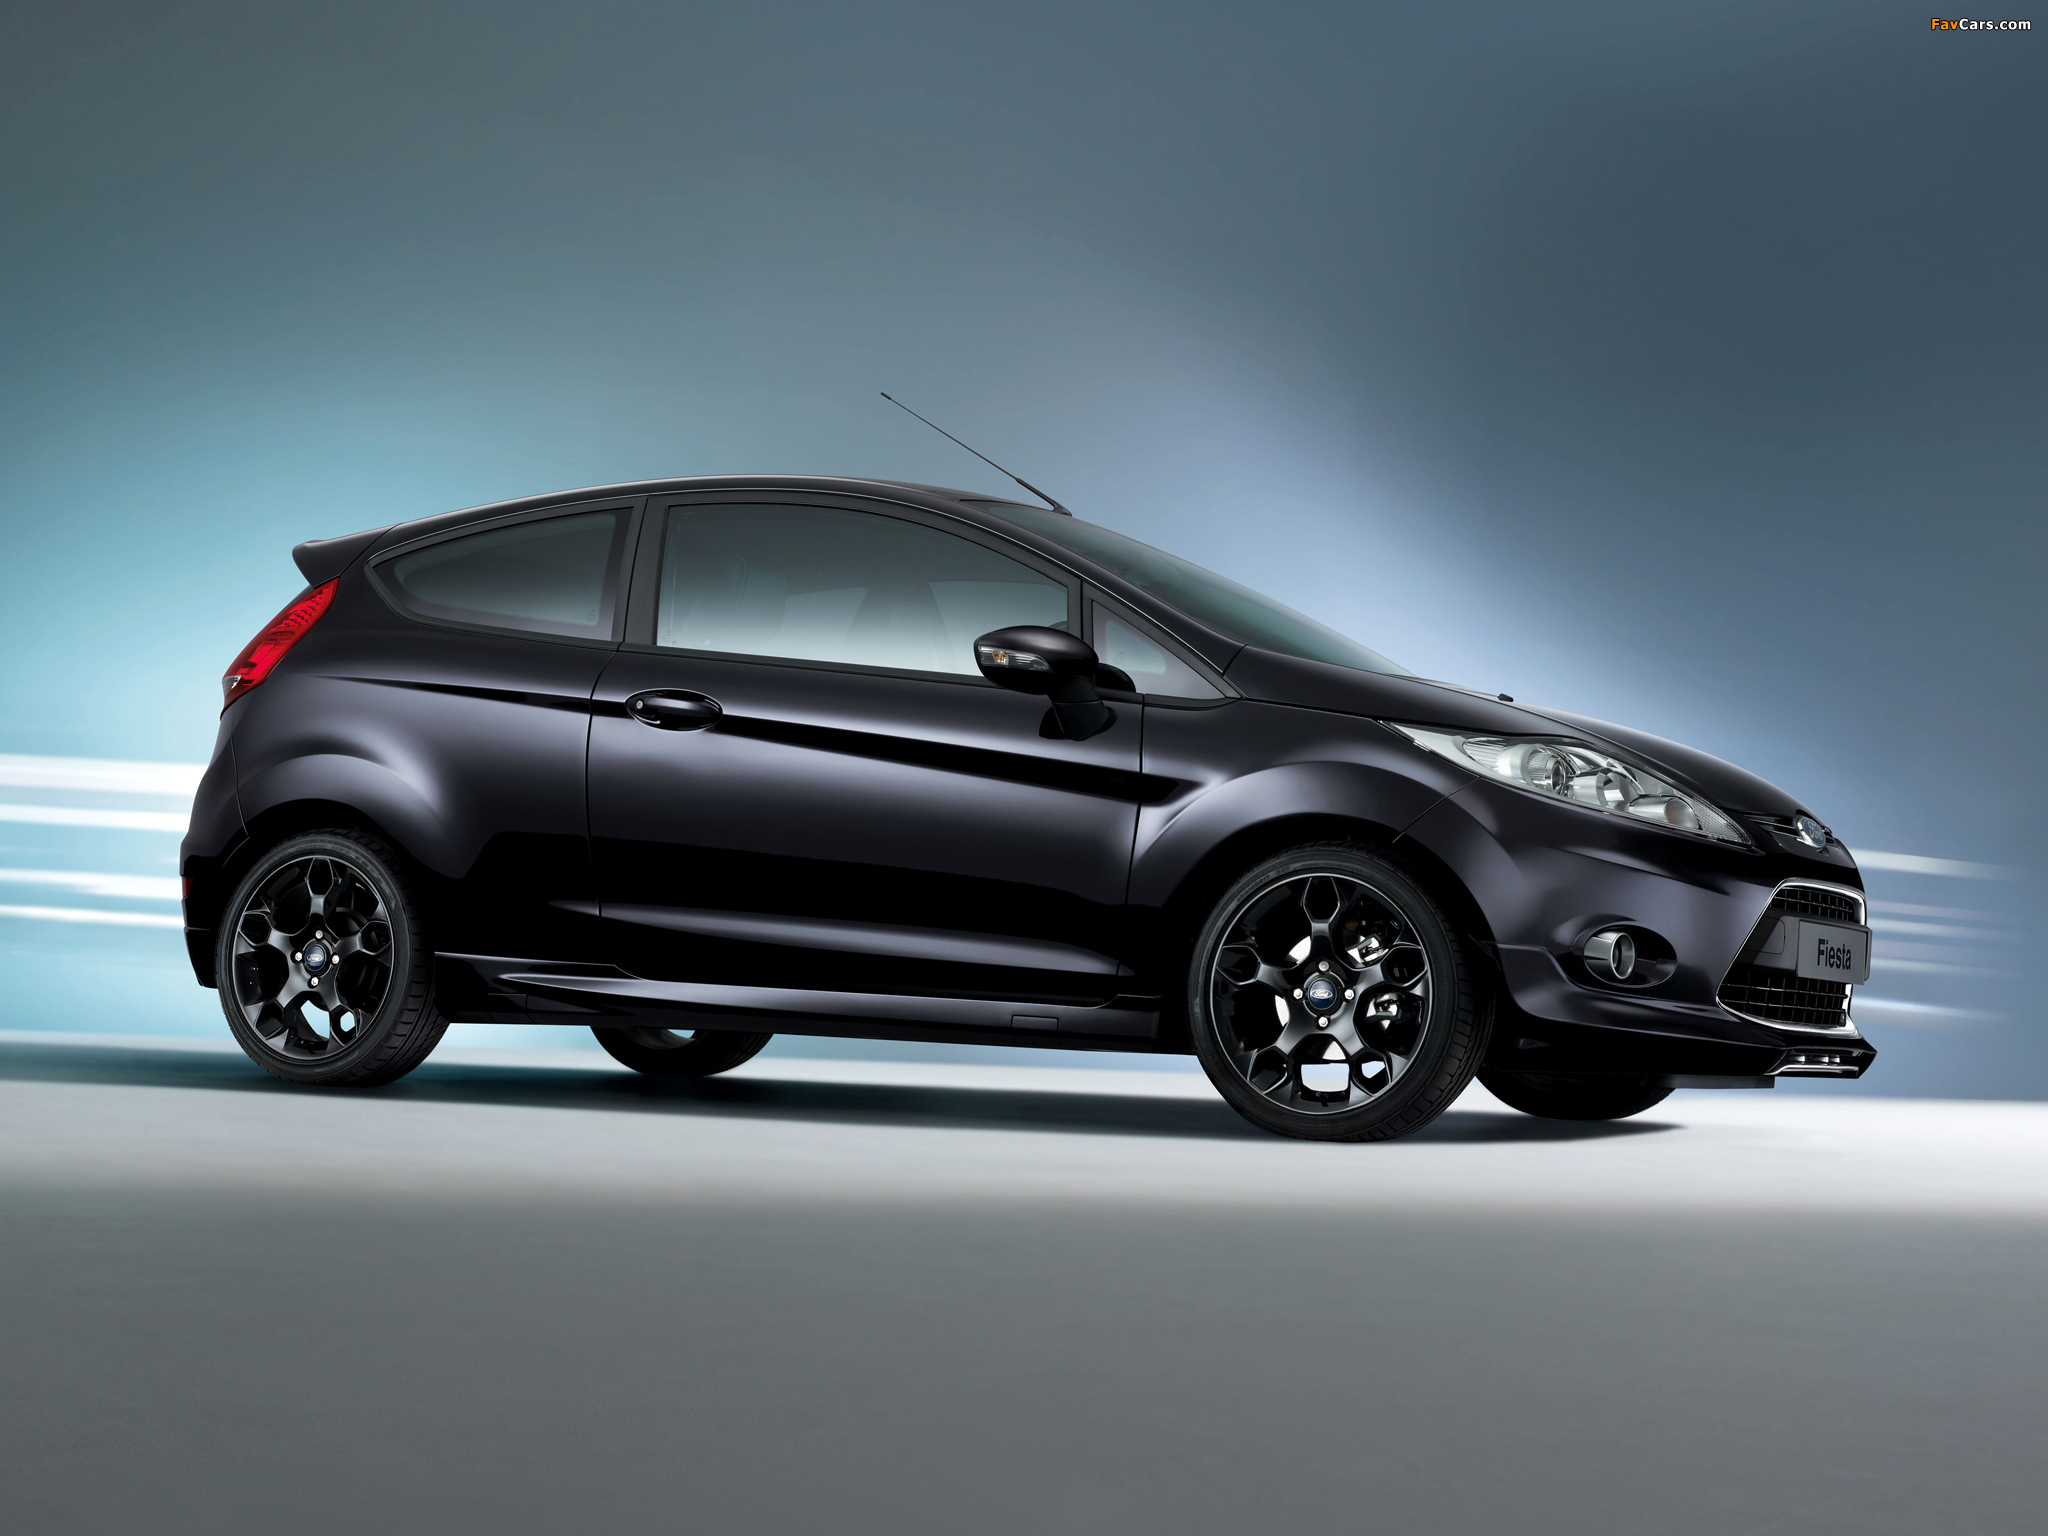 Ford Fiesta Metal 2011 pictures (2048 x 1536)